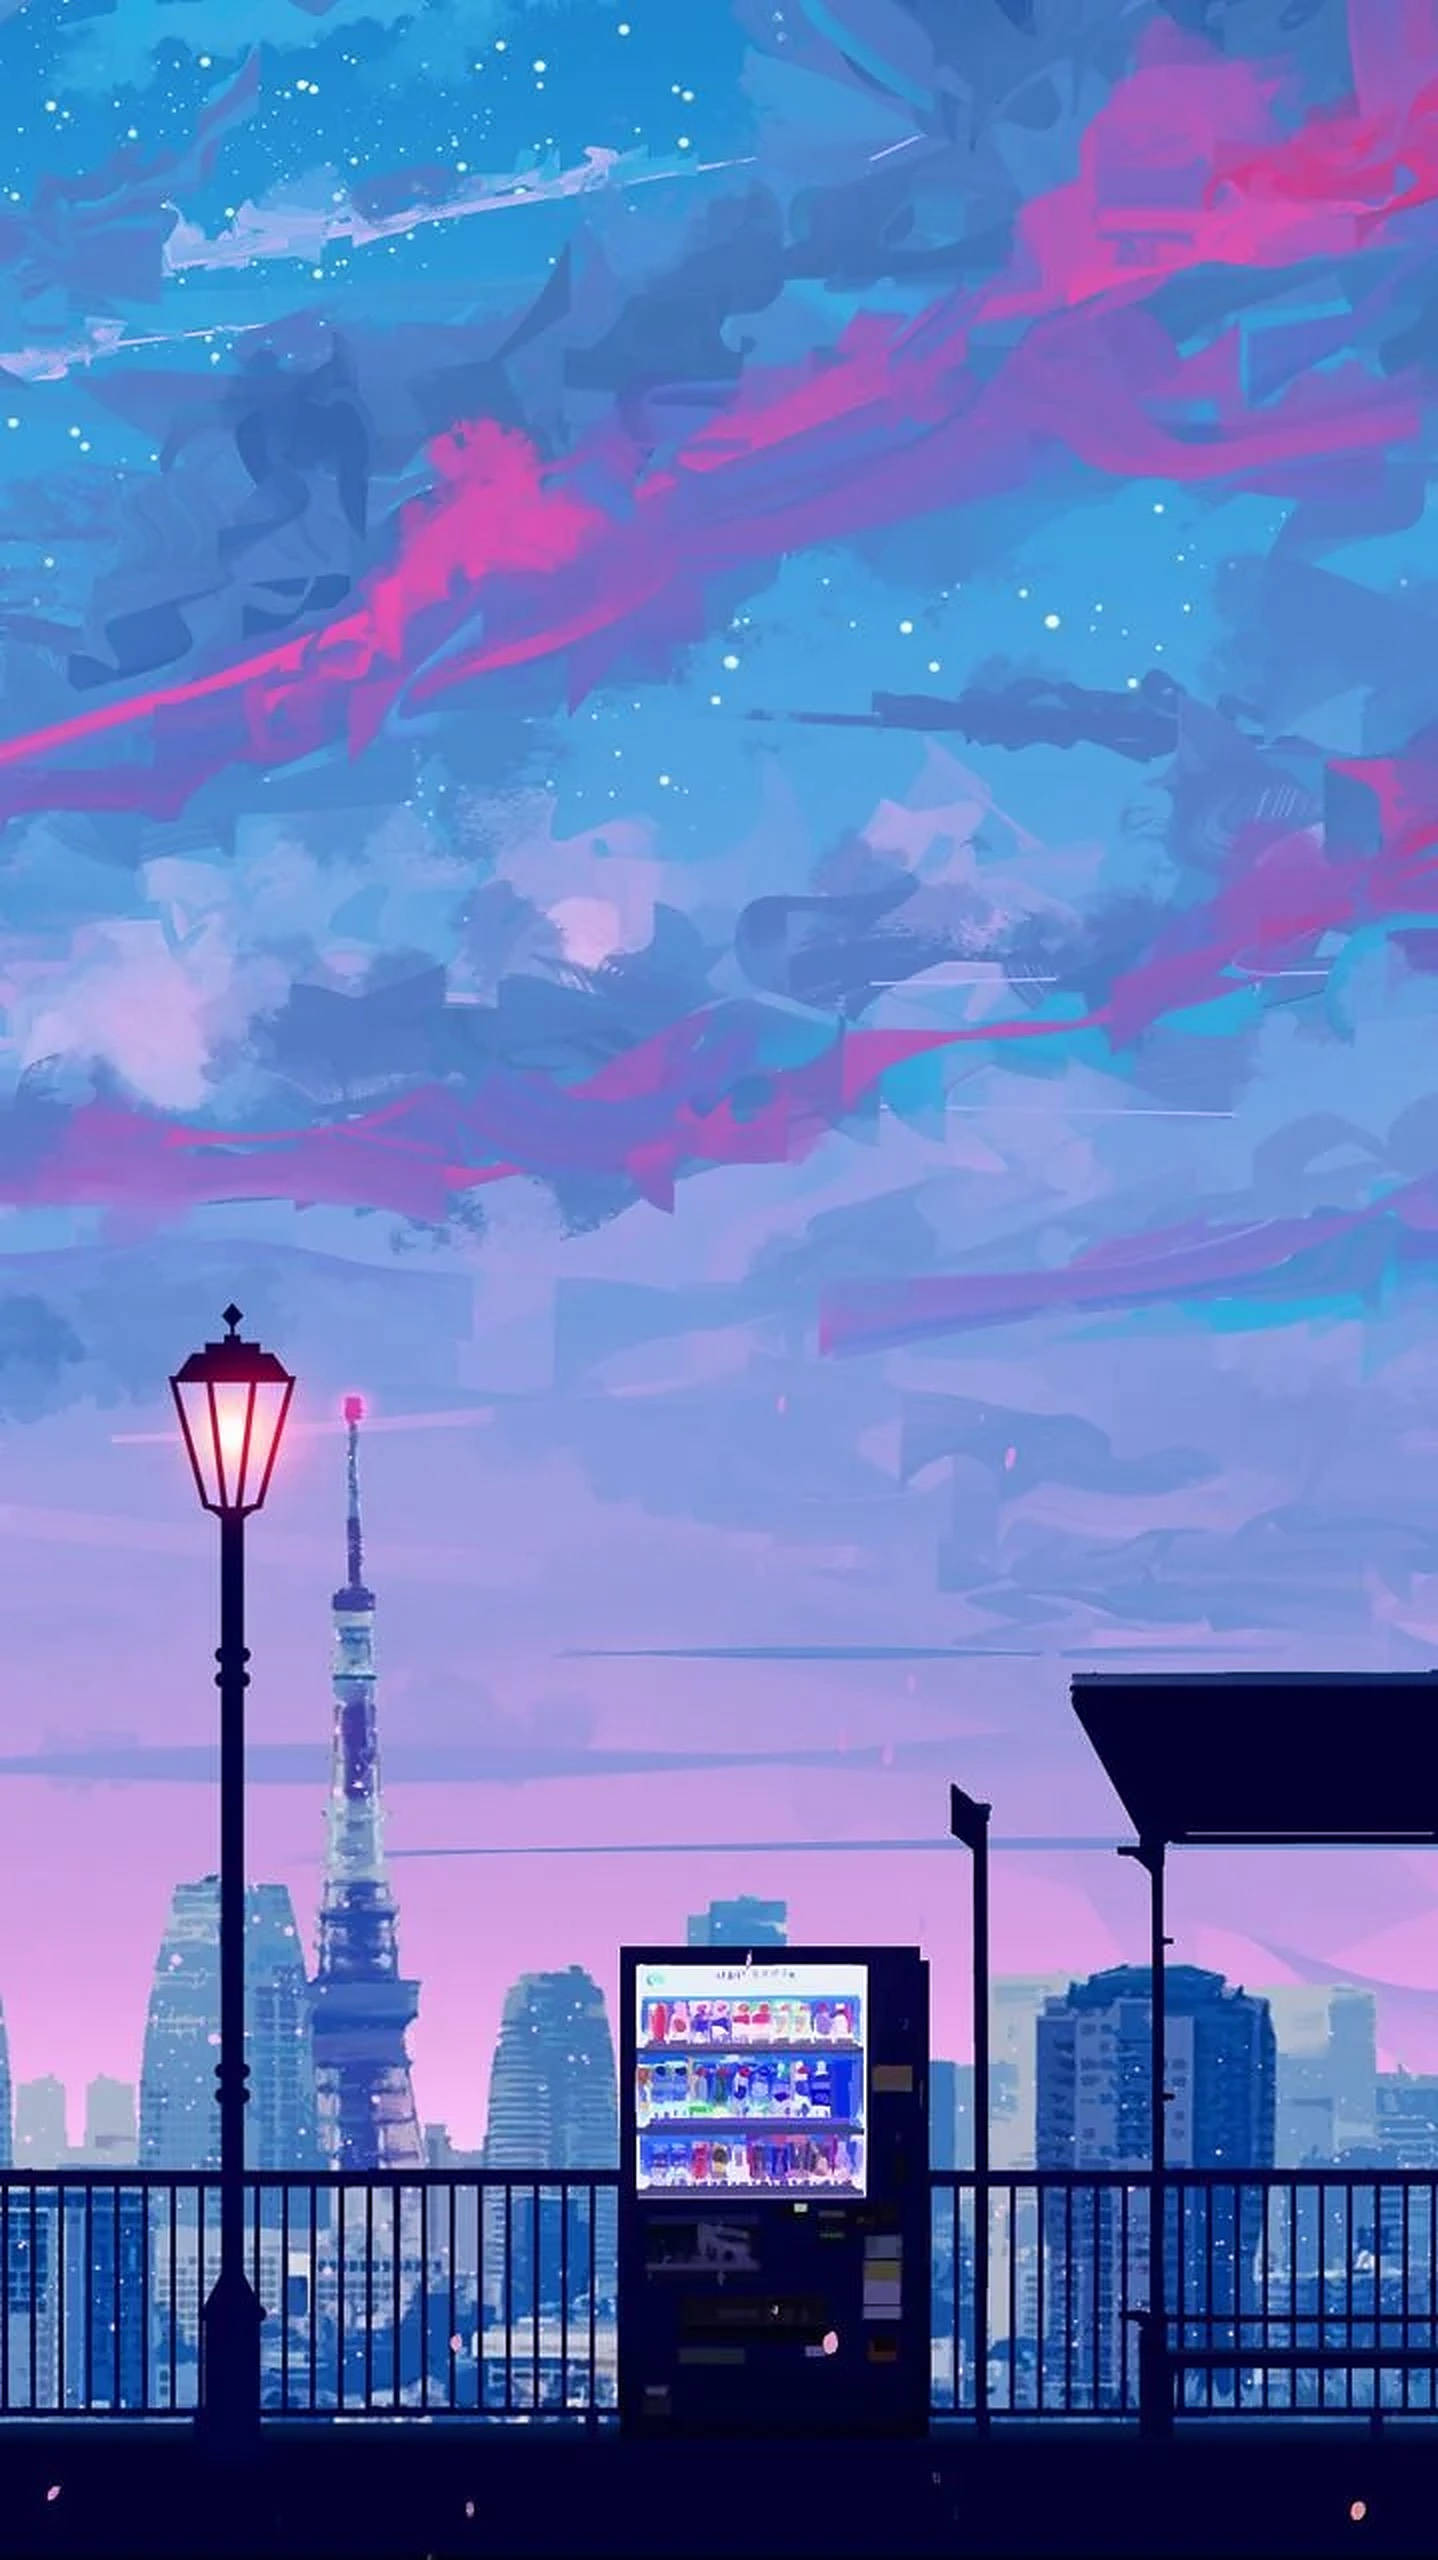 Do you love the City vibe and anime art? Then, these anime city iPhone wallpapers are a must-see for you! With beautiful and colorful illustrations, these wallpapers have captured different cityscapes in a unique and aesthetic way. Be sure to check them out to add some sparkle to your iPhone.